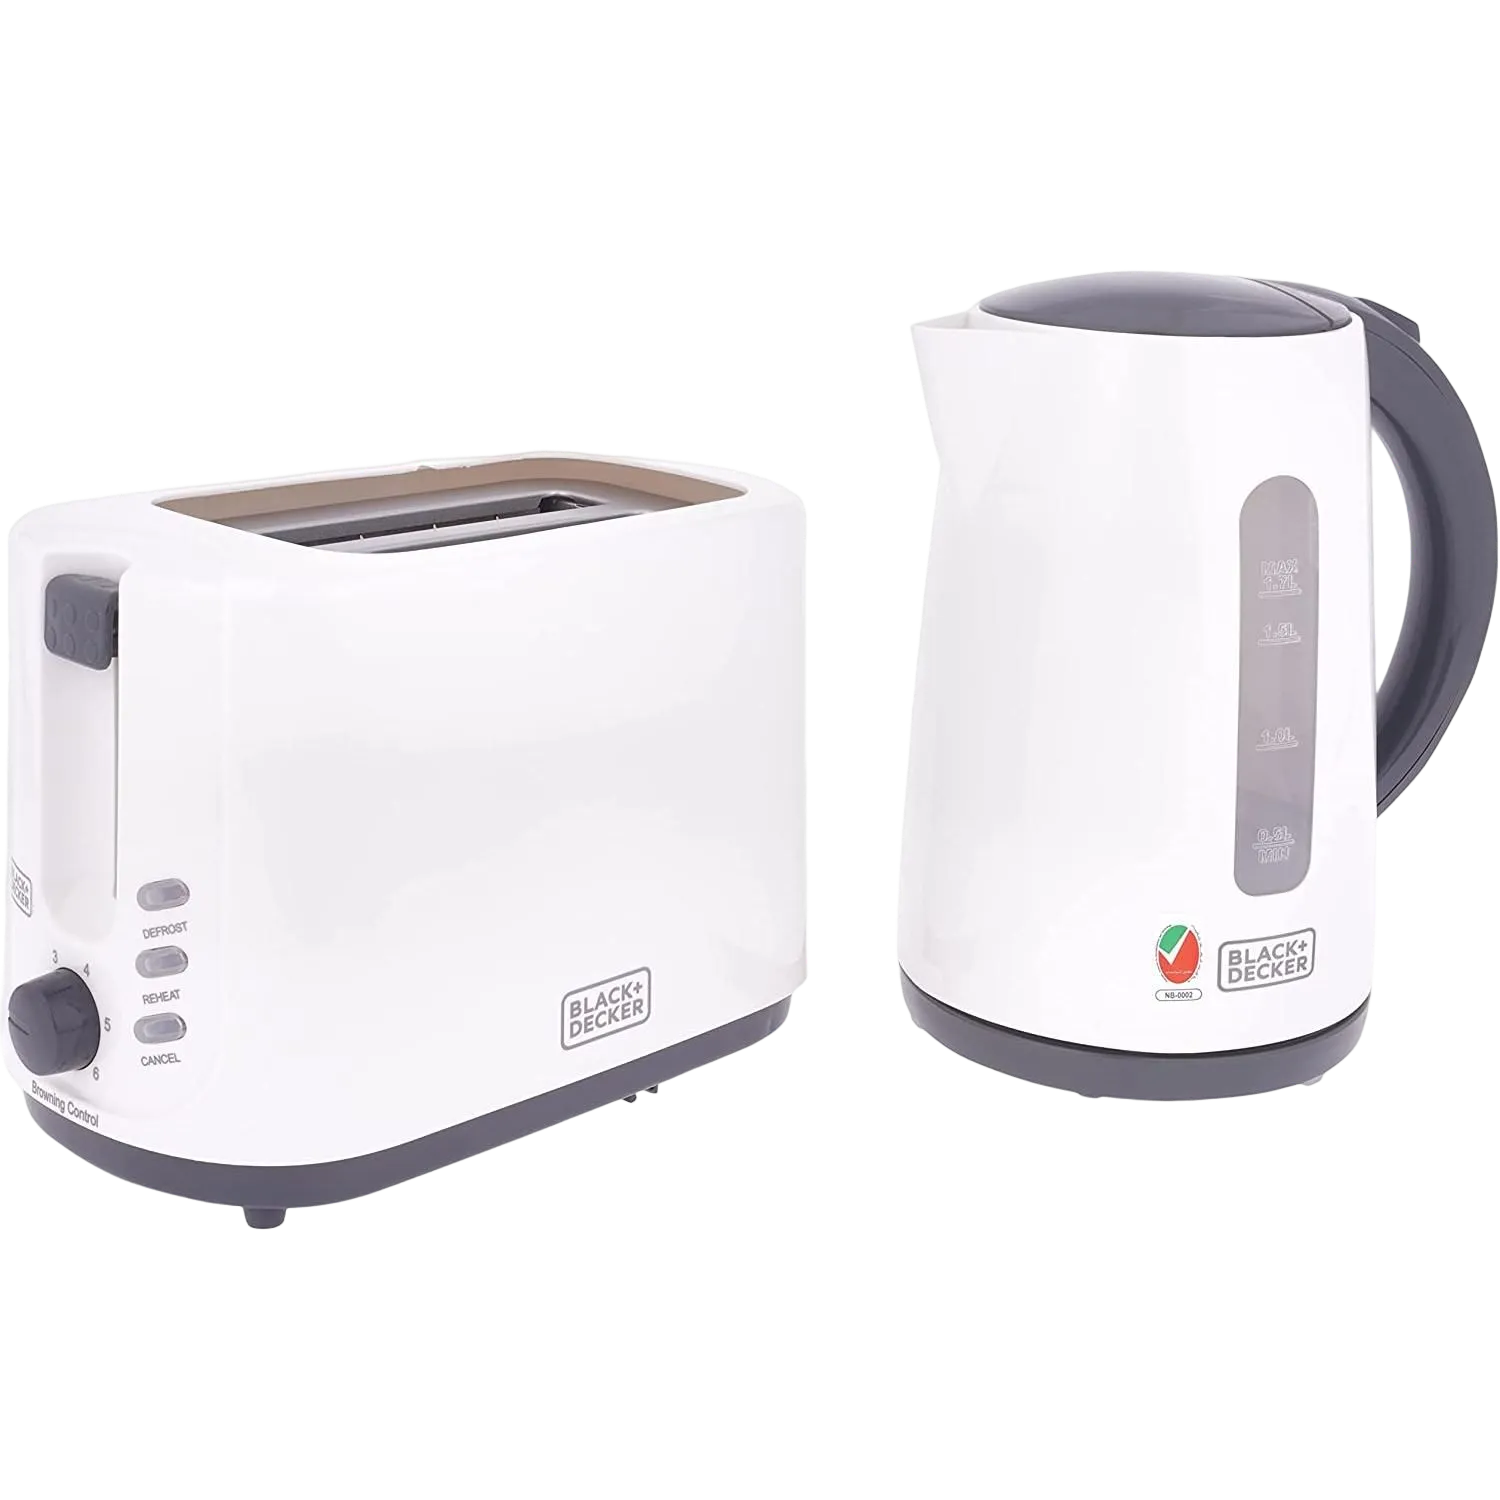 Black+Decker Breakfast Set With 1.7 Liters Electric Kettle And 2 Slice Bread Toaster MBF70-B5 White/Grey